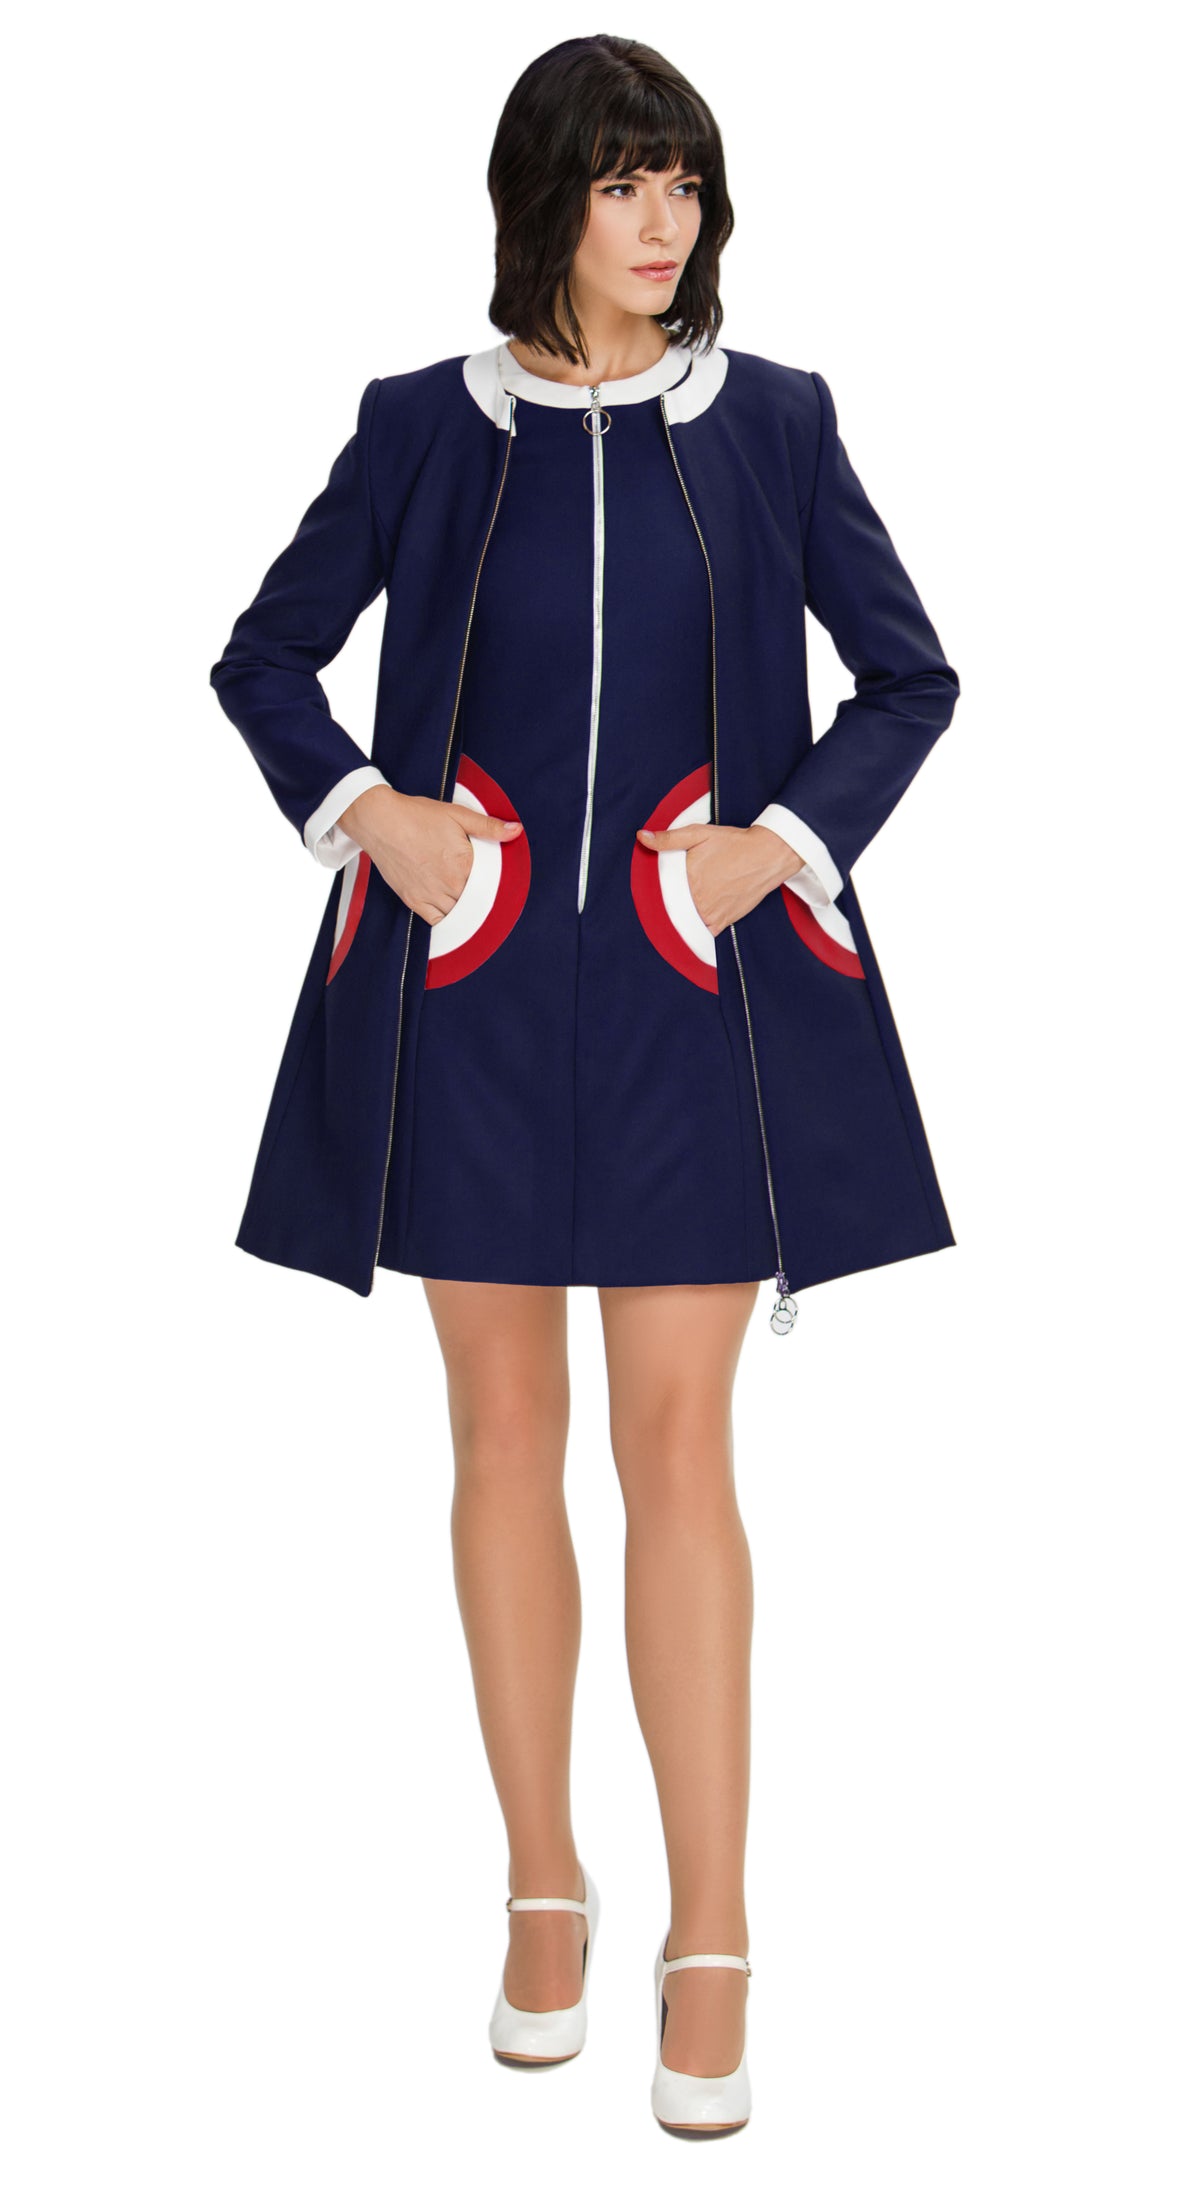 Our retro Inspired Autumn Coat; a playful nod to retro fashion that's perfect for the season. This coat captures the essence of the era through its color palette, charming detailing, and delightful playfulness. The front looped zipper closure adds a touch of authenticity, while the full-length sleeves and traditional rounded neck maintain the timeless appeal.